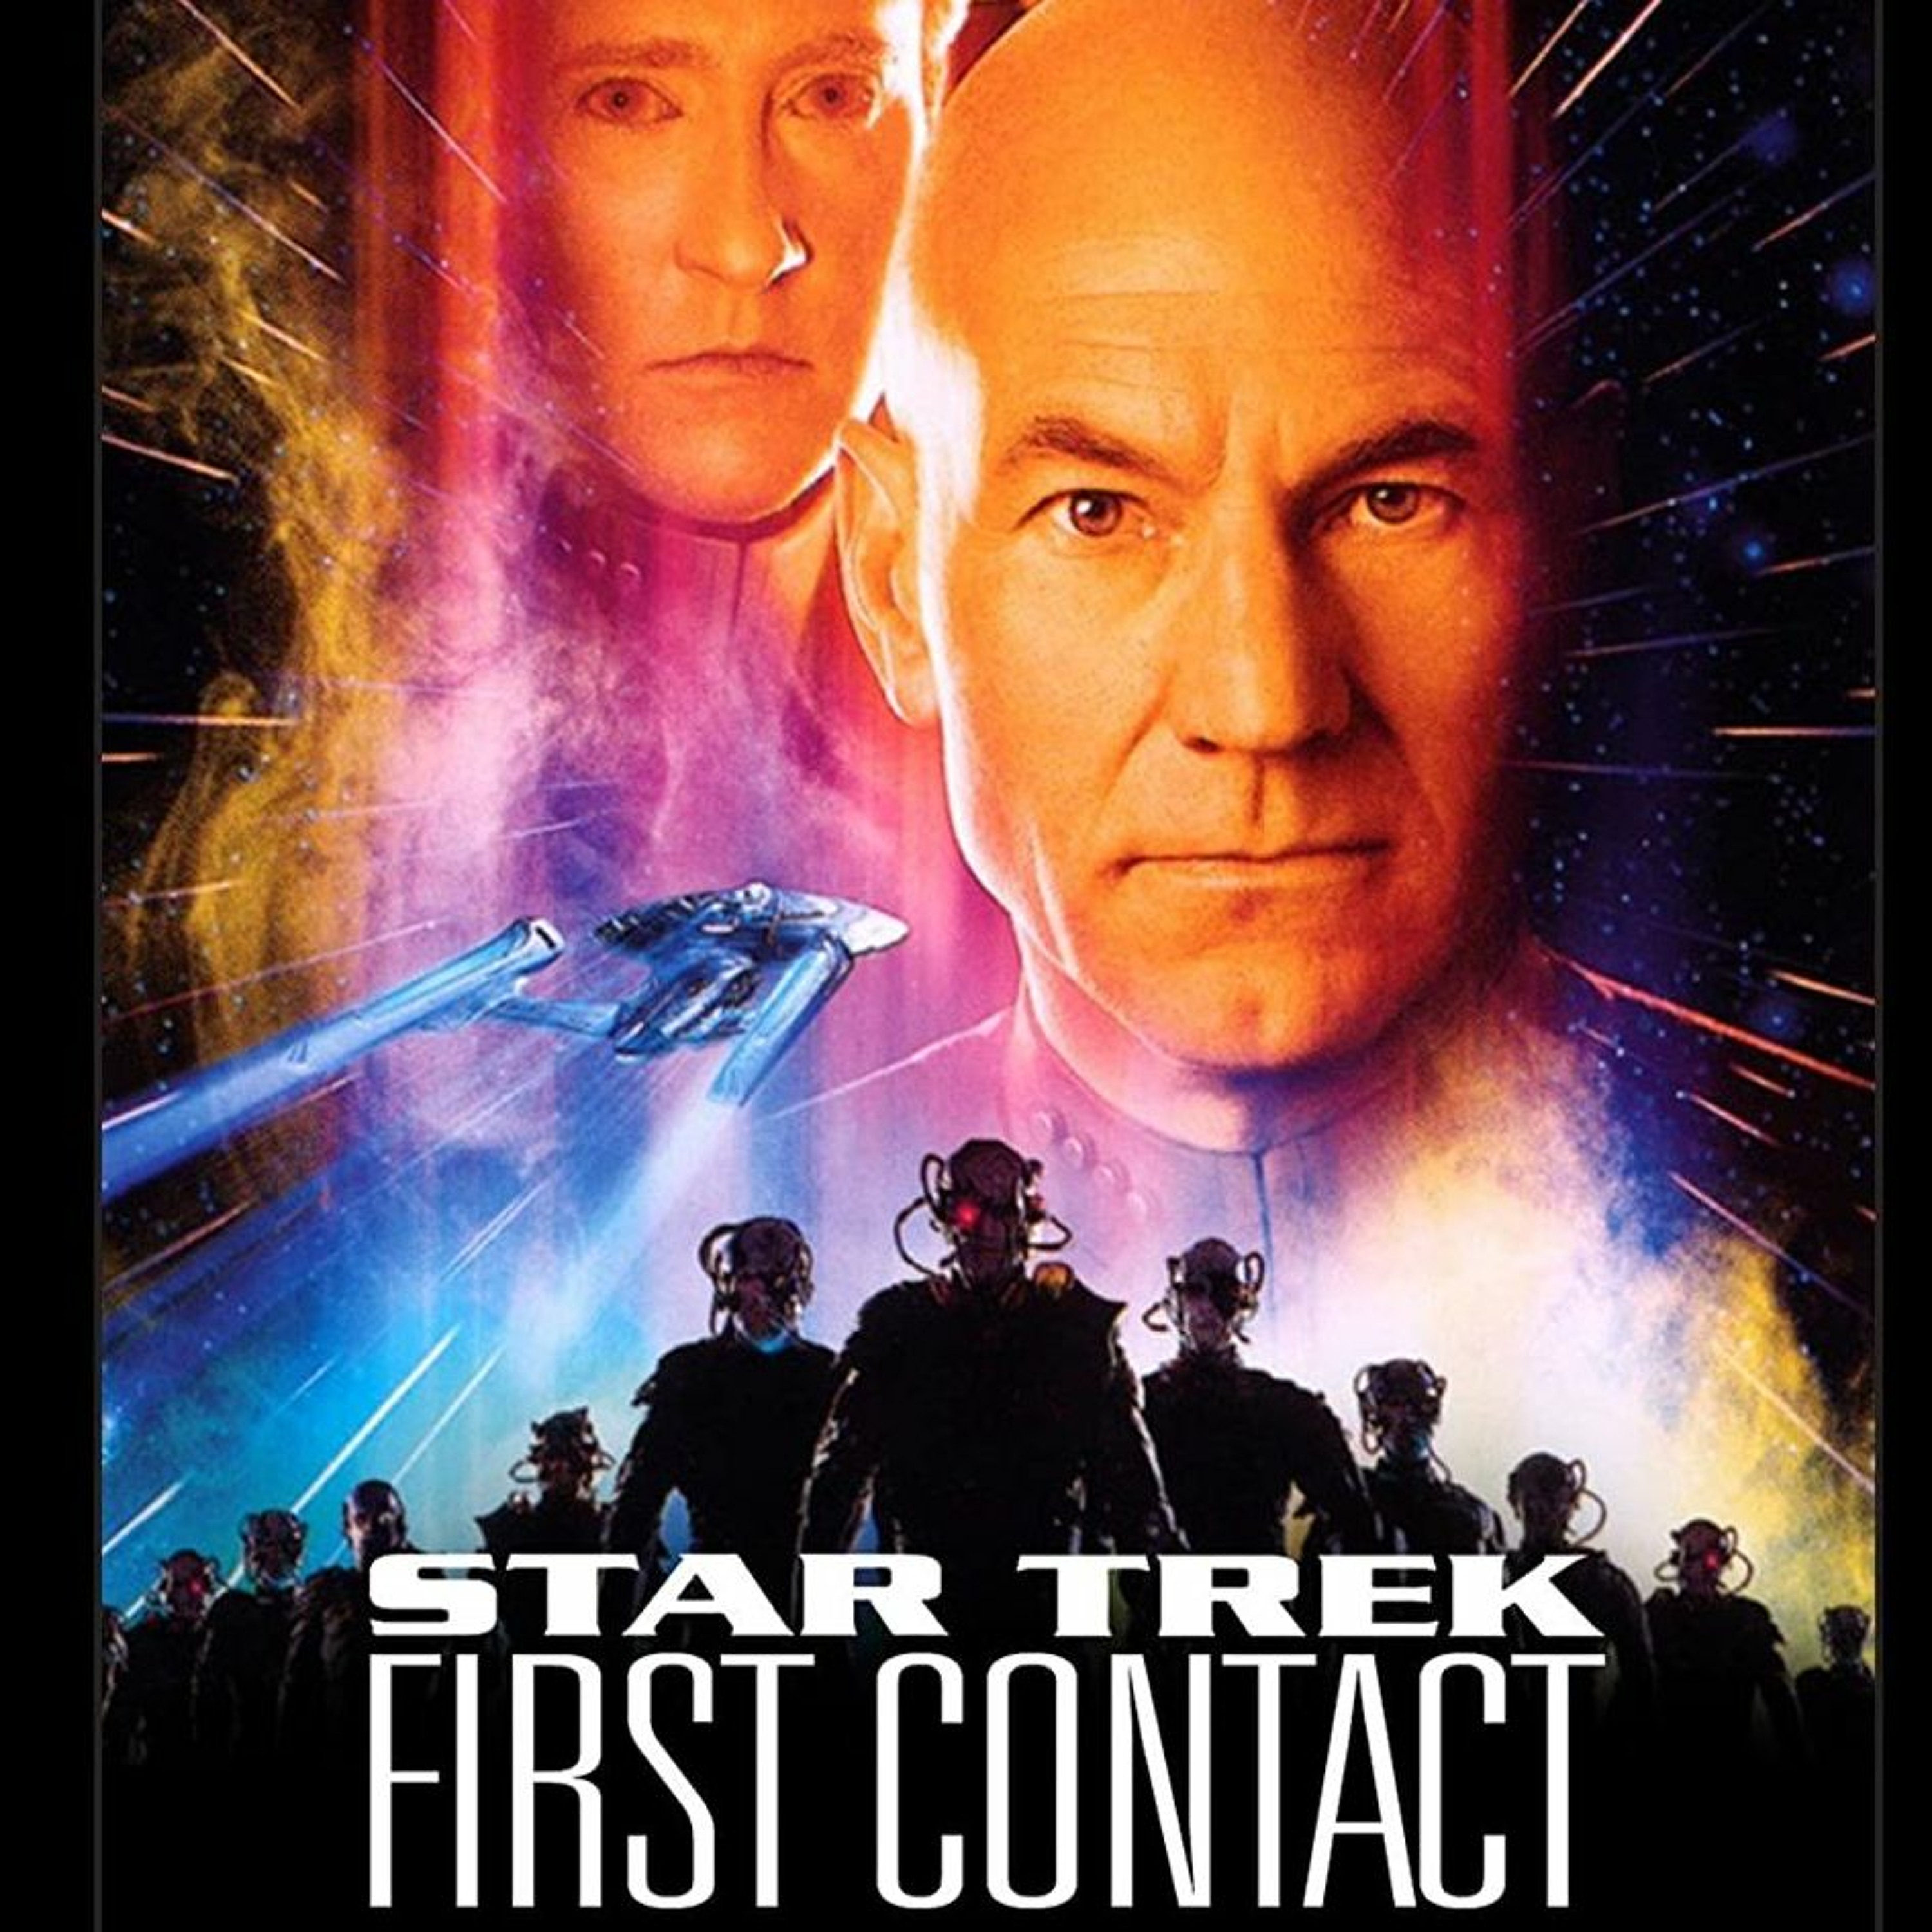 Episode 15 - First Contact is about Ourselves